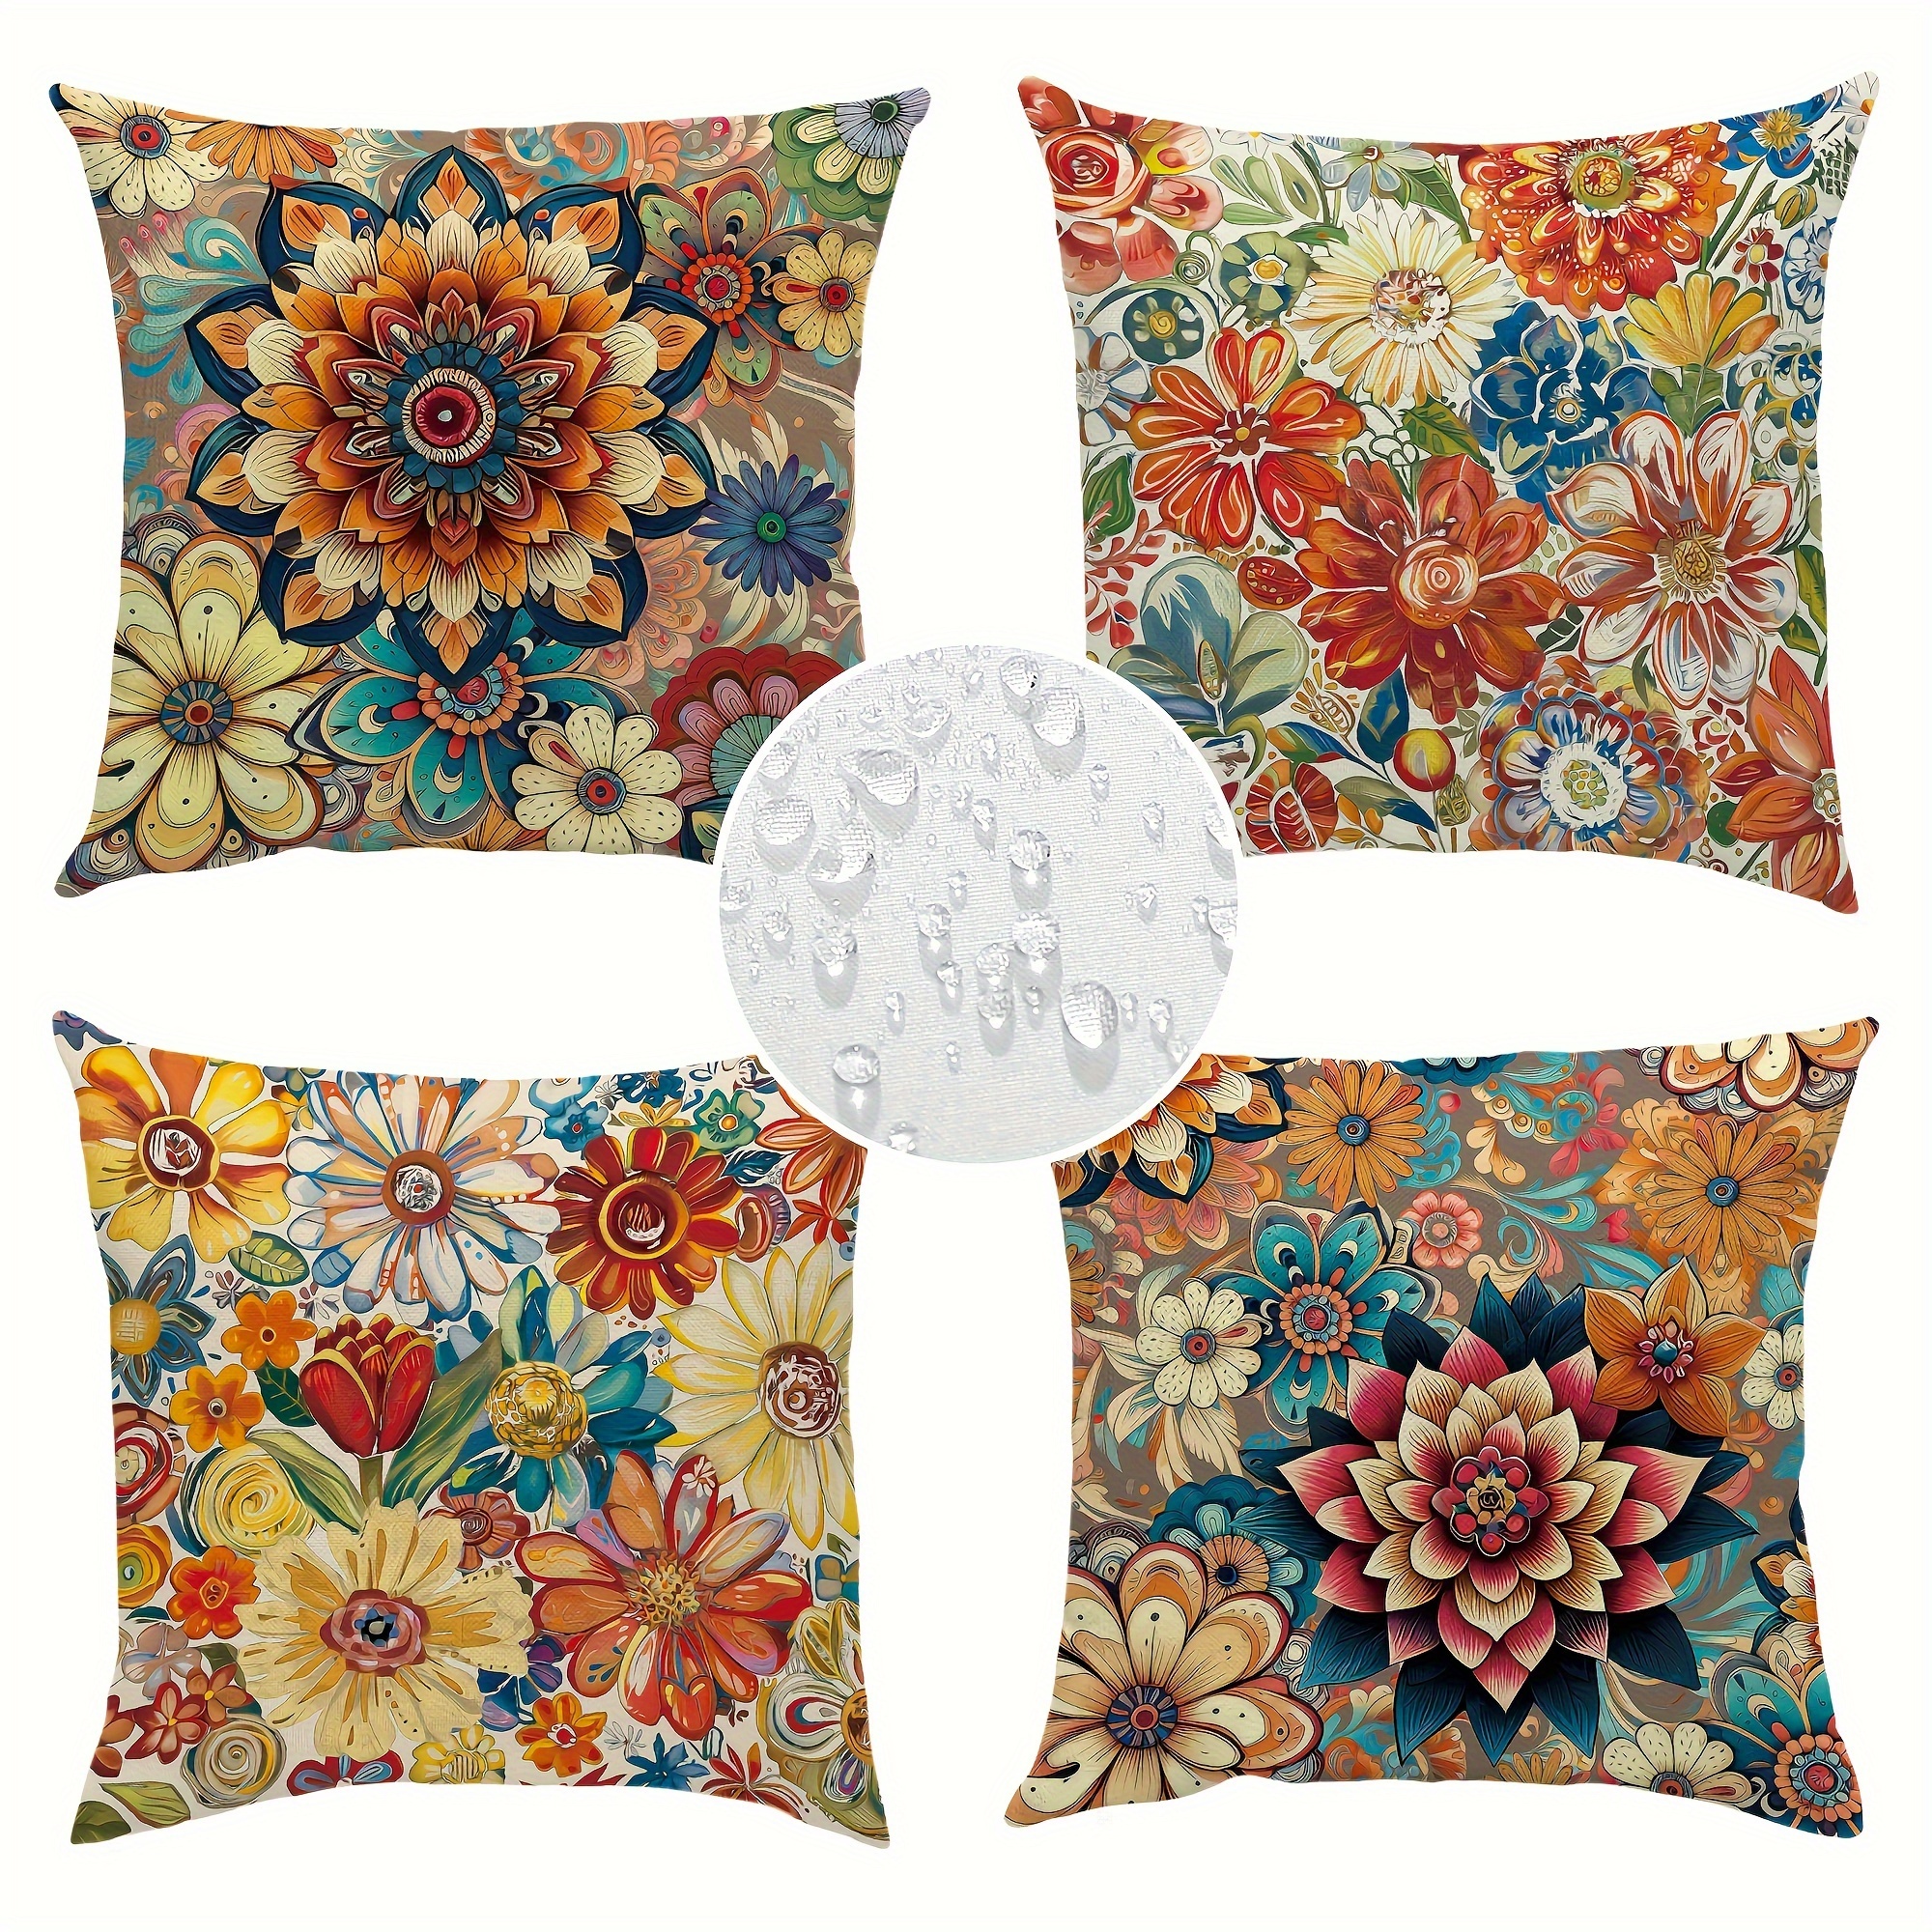 

4-piece Set Rustic Floral Waterproof Outdoor Throw Pillow Covers, 18x18 Inches - Durable Twill Fabric With Zipper Closure For Garden, Patio Furniture & Swing Decor